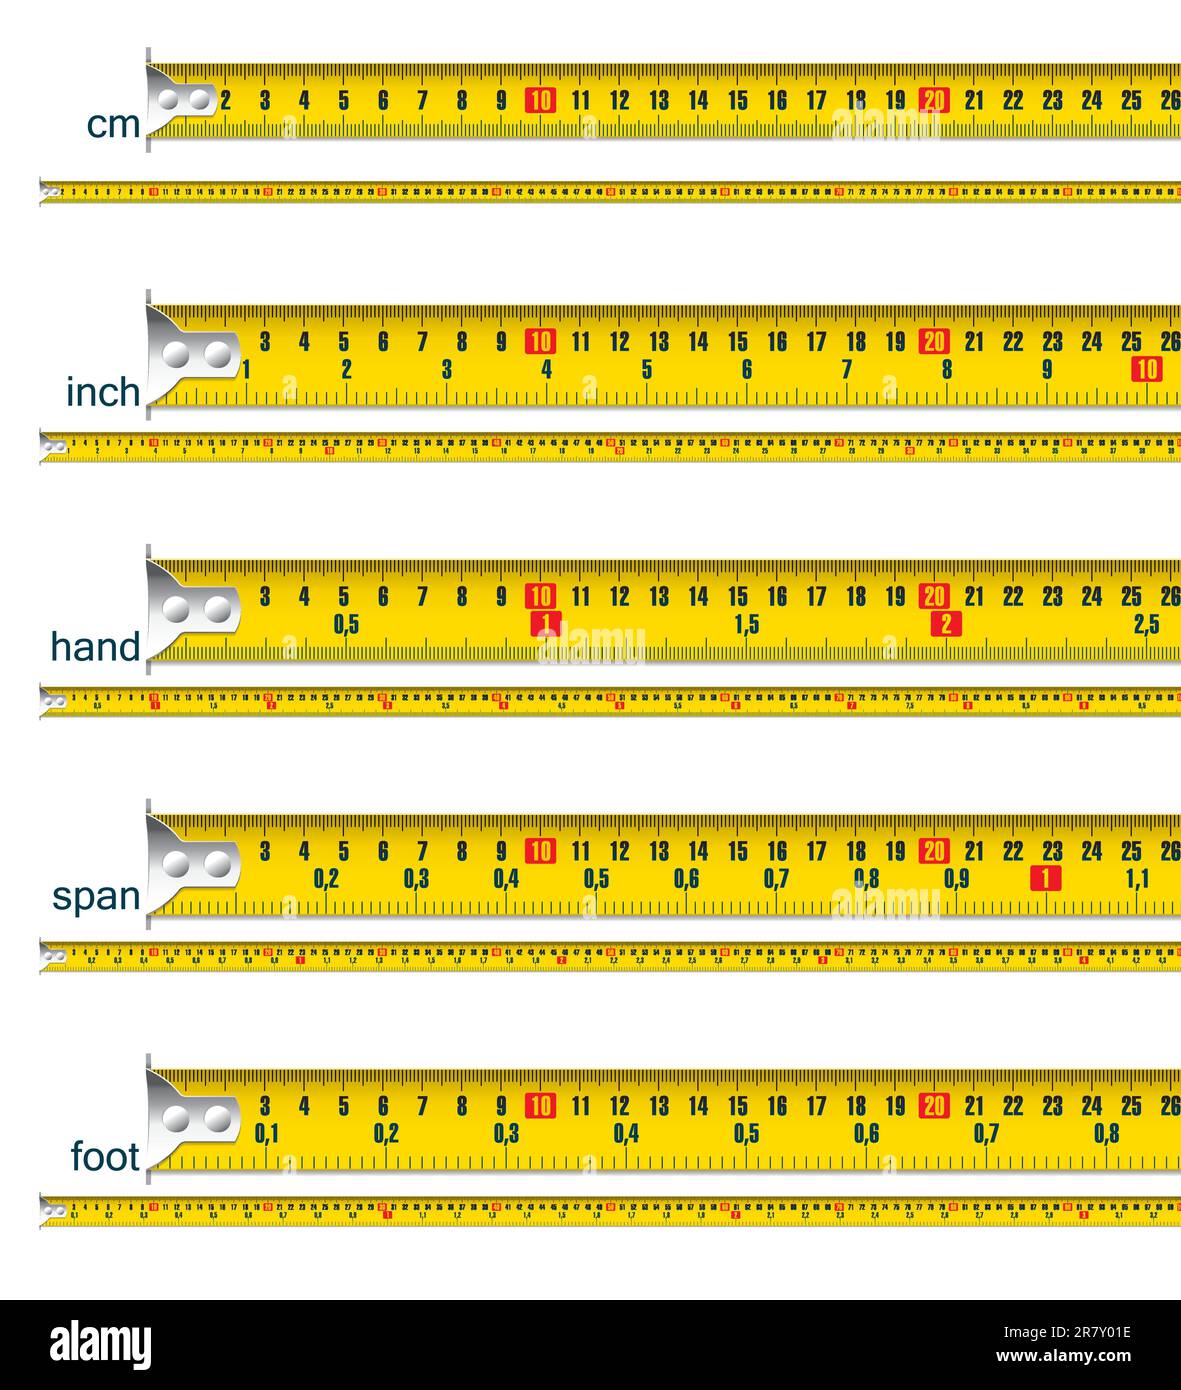 tape measure in cm, cm and inch, cm and hand, cm and span, cm and foot - vector illustration Stock Vector